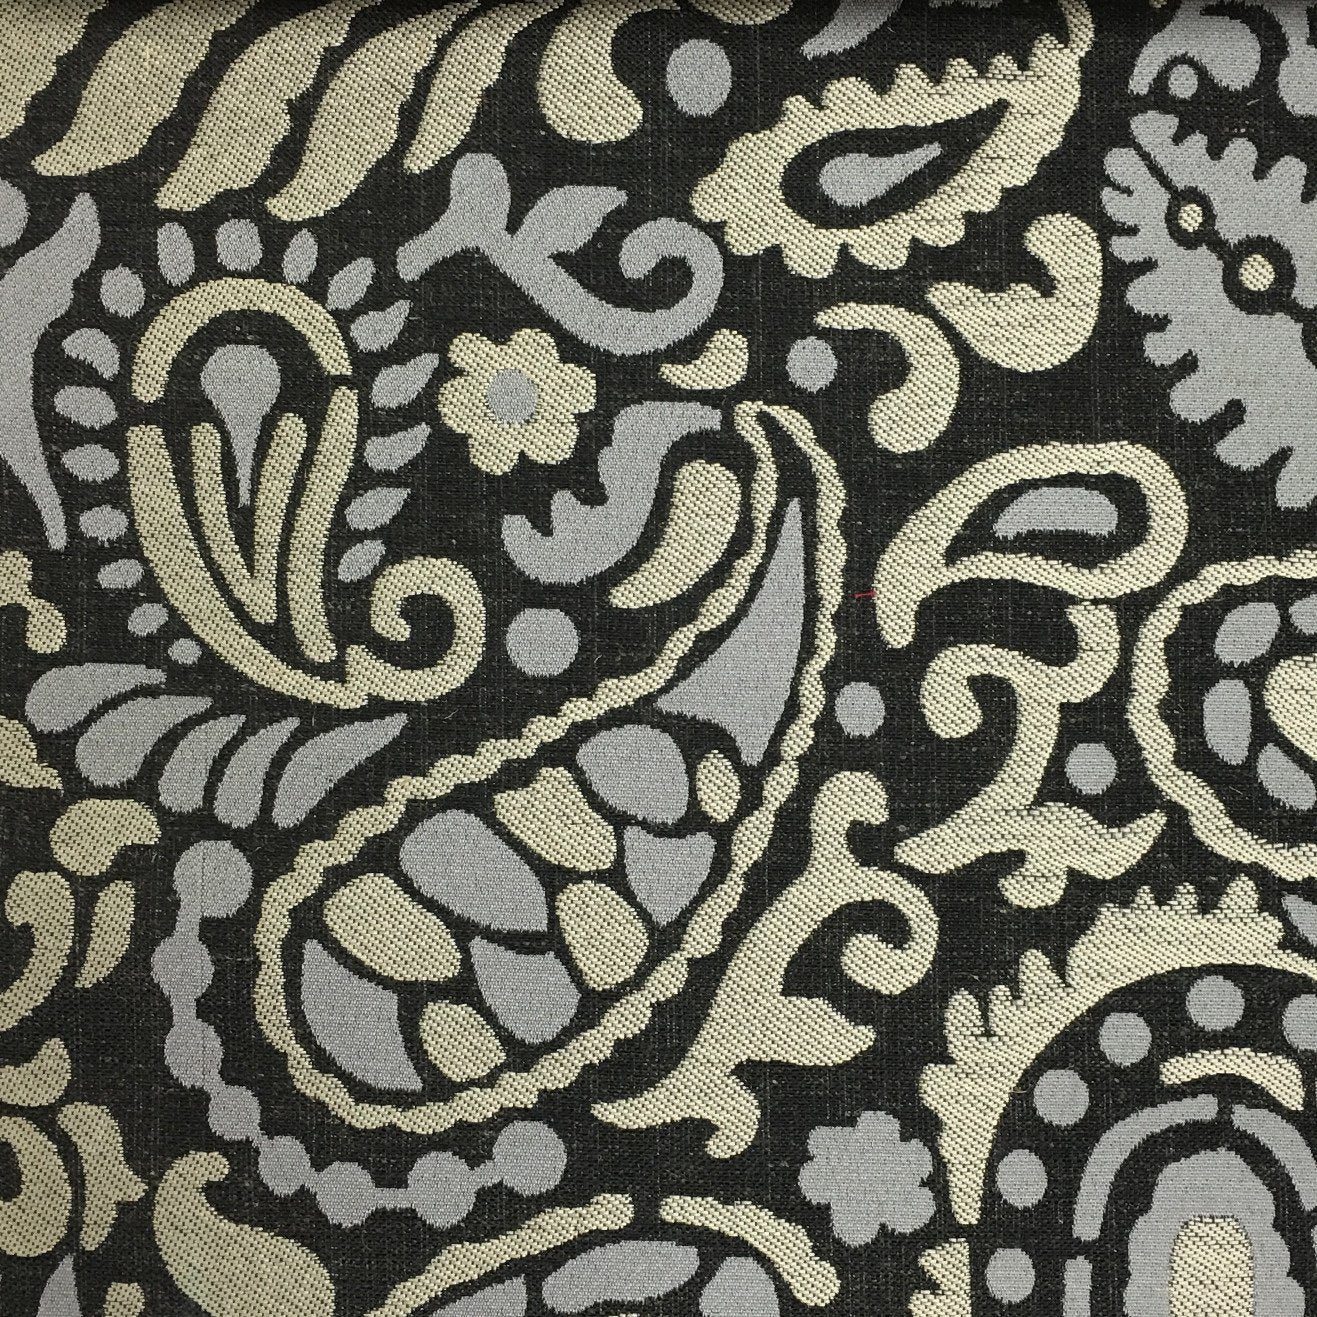 contemporary fabric pattern